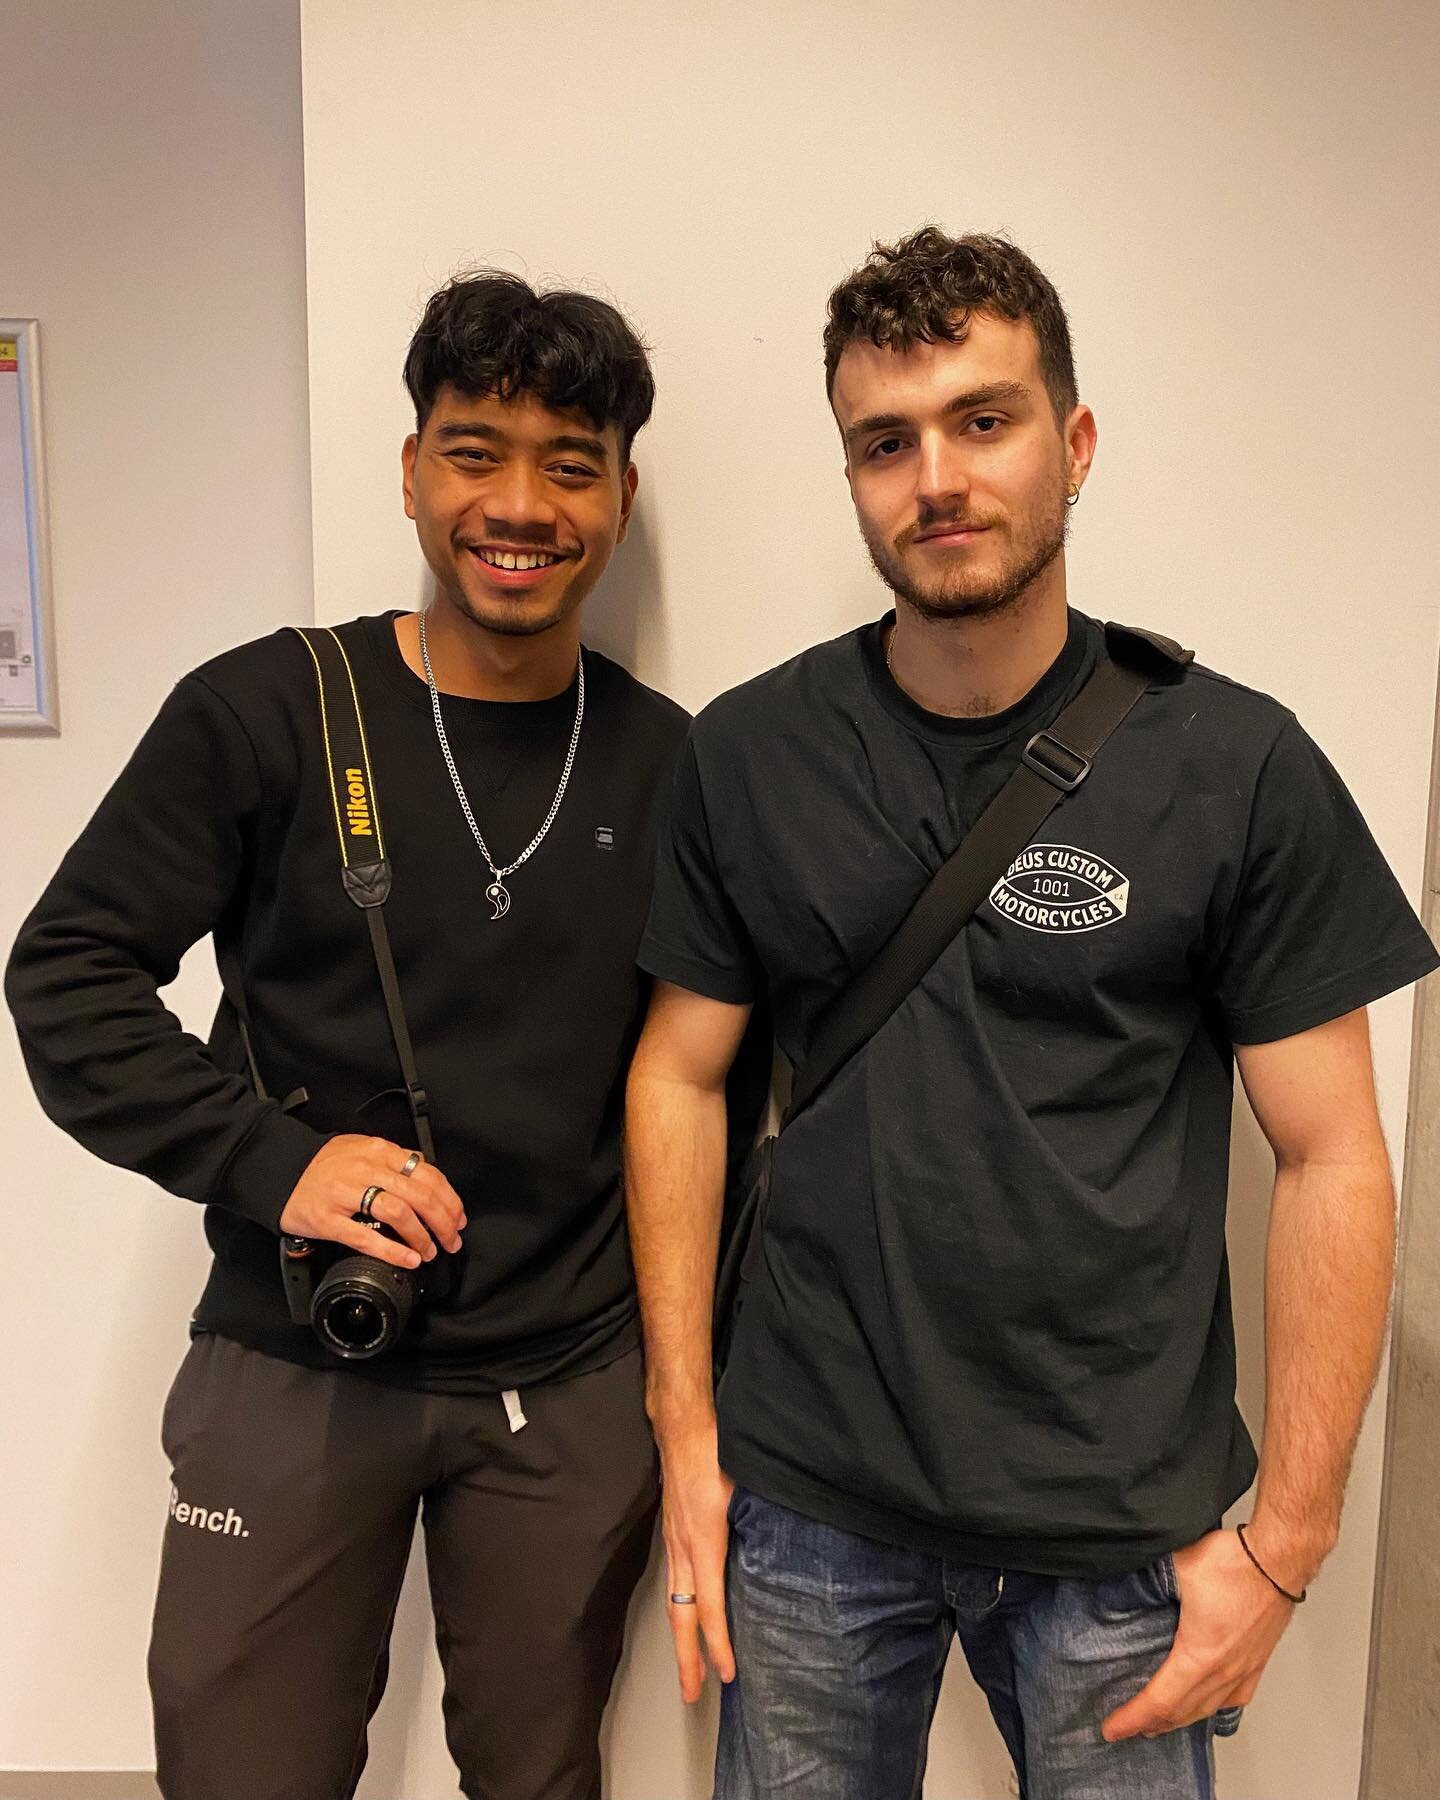 Monday SHOUTOUT! 📢

Meet Hizryan and Jimmy, our photographers and videographers! 👋🏼 

They have been working hard at streamlining our production and marketing here at 450 Records. Talk about a dream team! 🤩

You may have spotted them in their ele